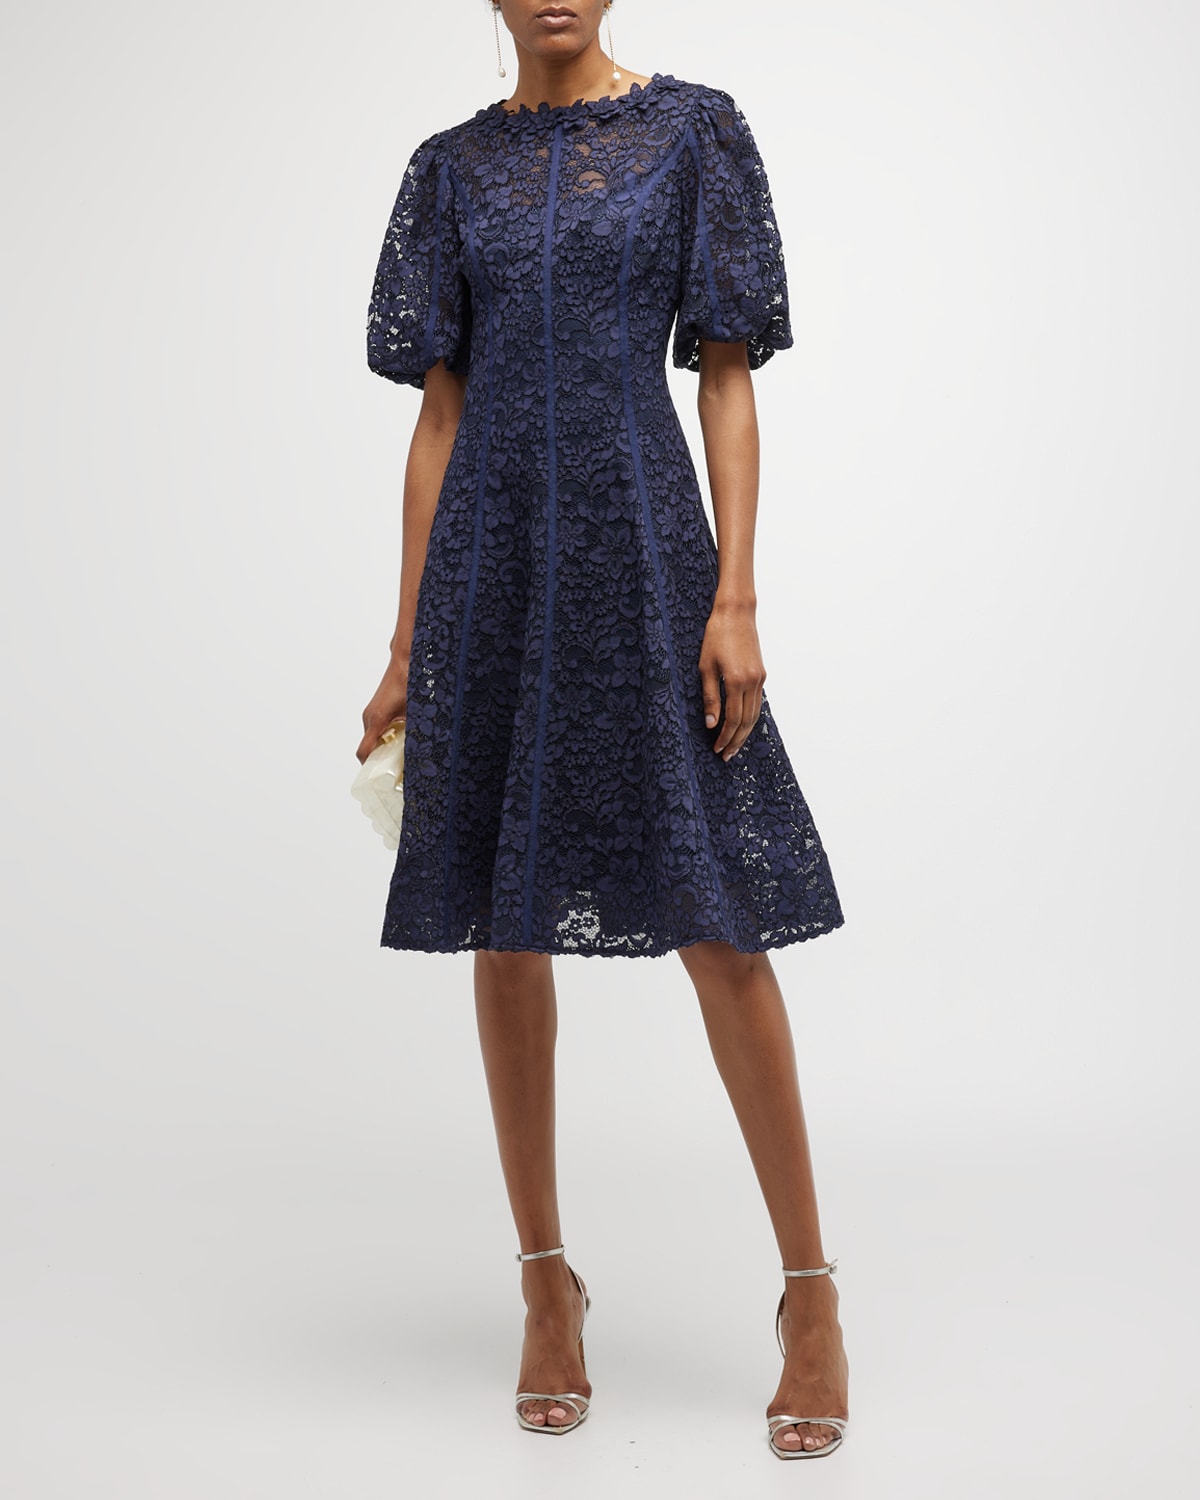 Rickie Freeman For Teri Jon Embroidered Puff-sleeve Floral Lace Midi Dress In Navy